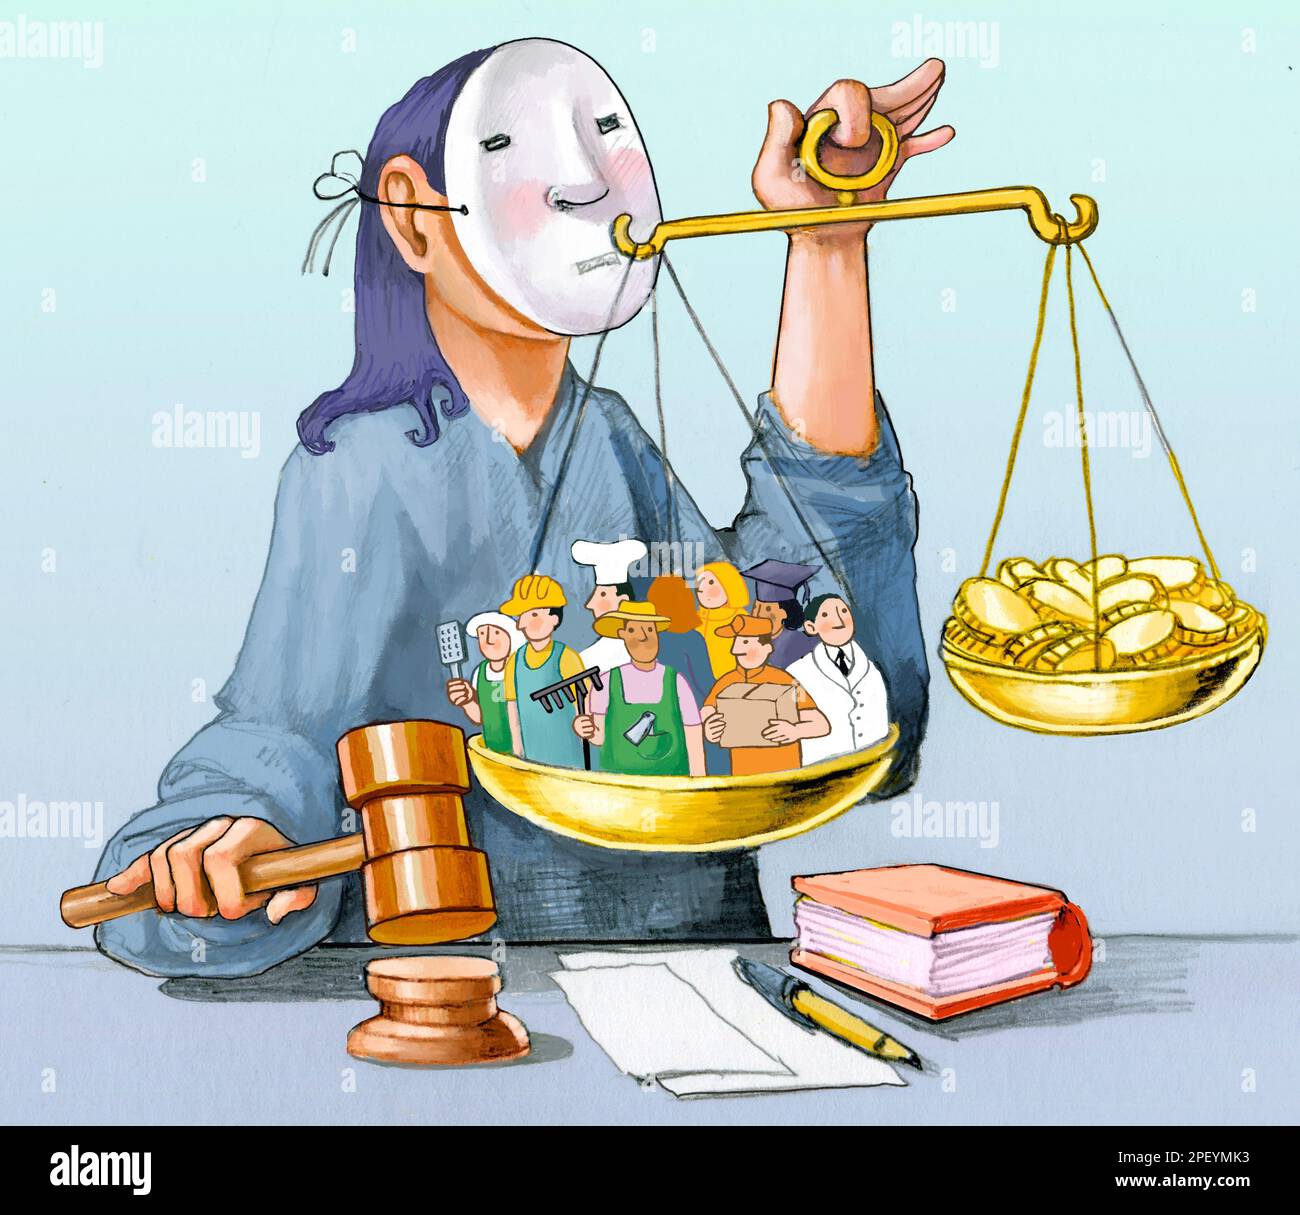 a judge with a mask weighing workers and money on a scale  photoshop illustration Stock Photo